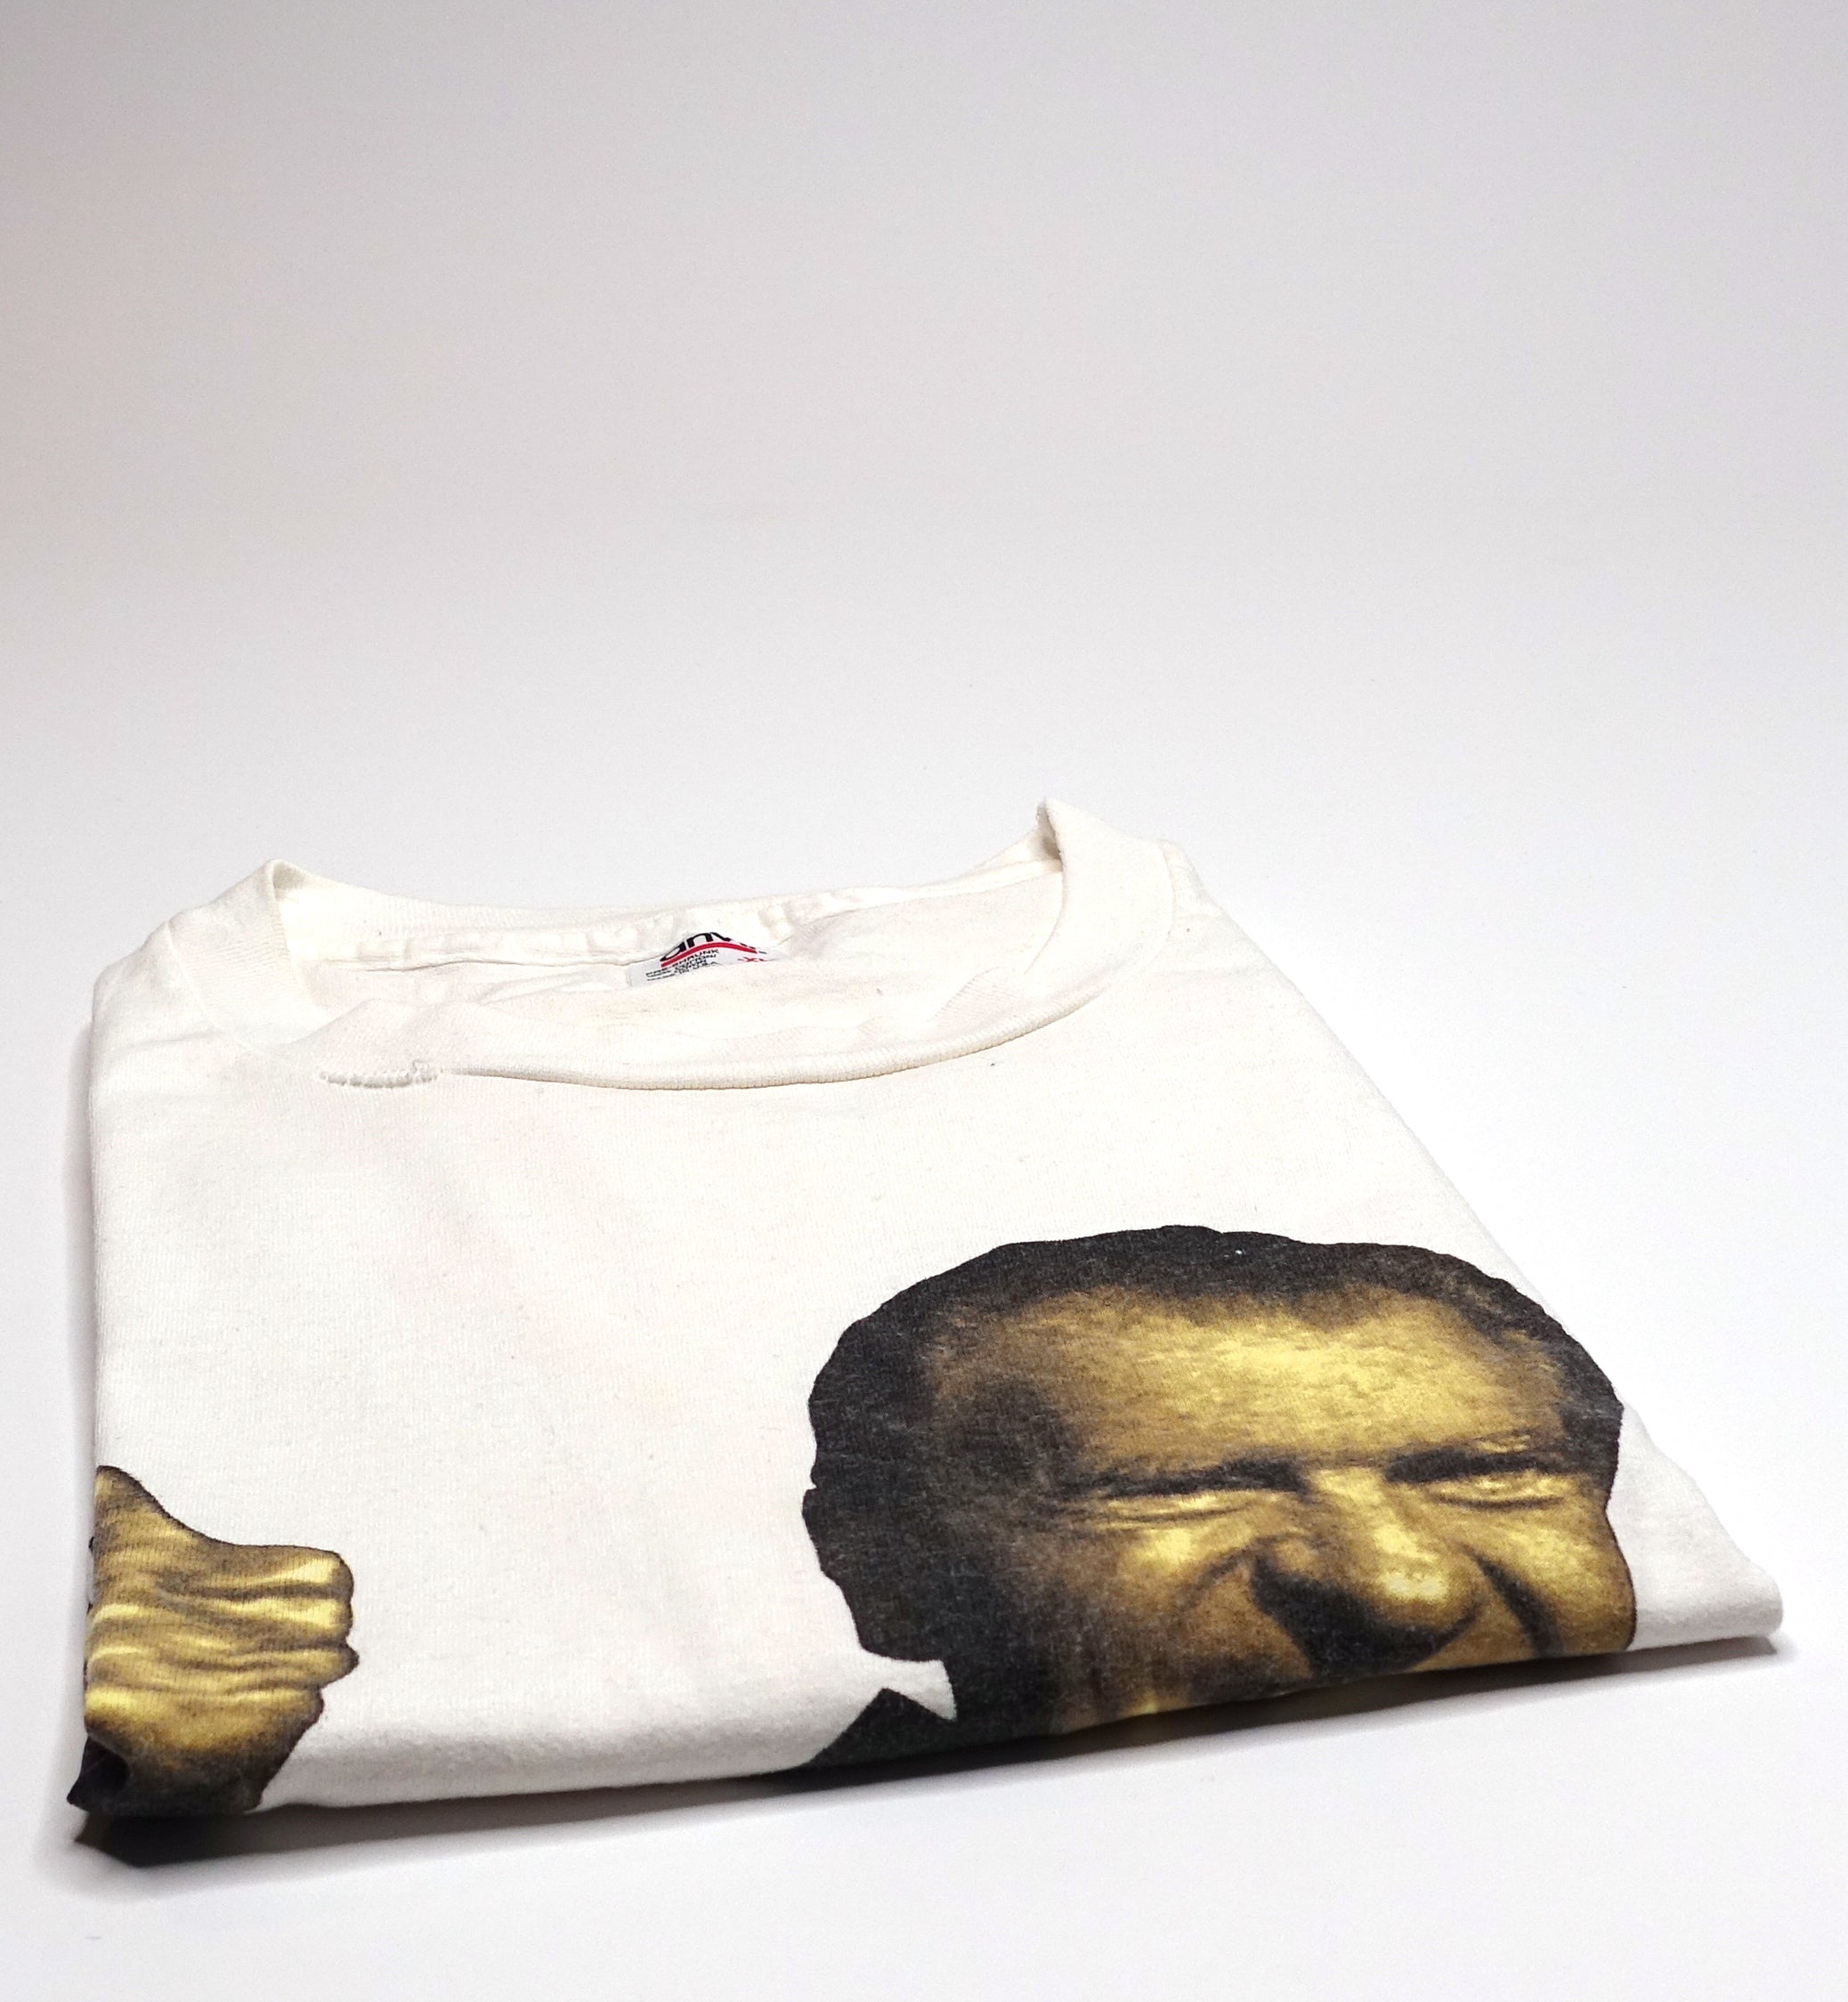 Richard Nixon - Tanned Rested and Dead Nixon in '96 Shirt Size XL